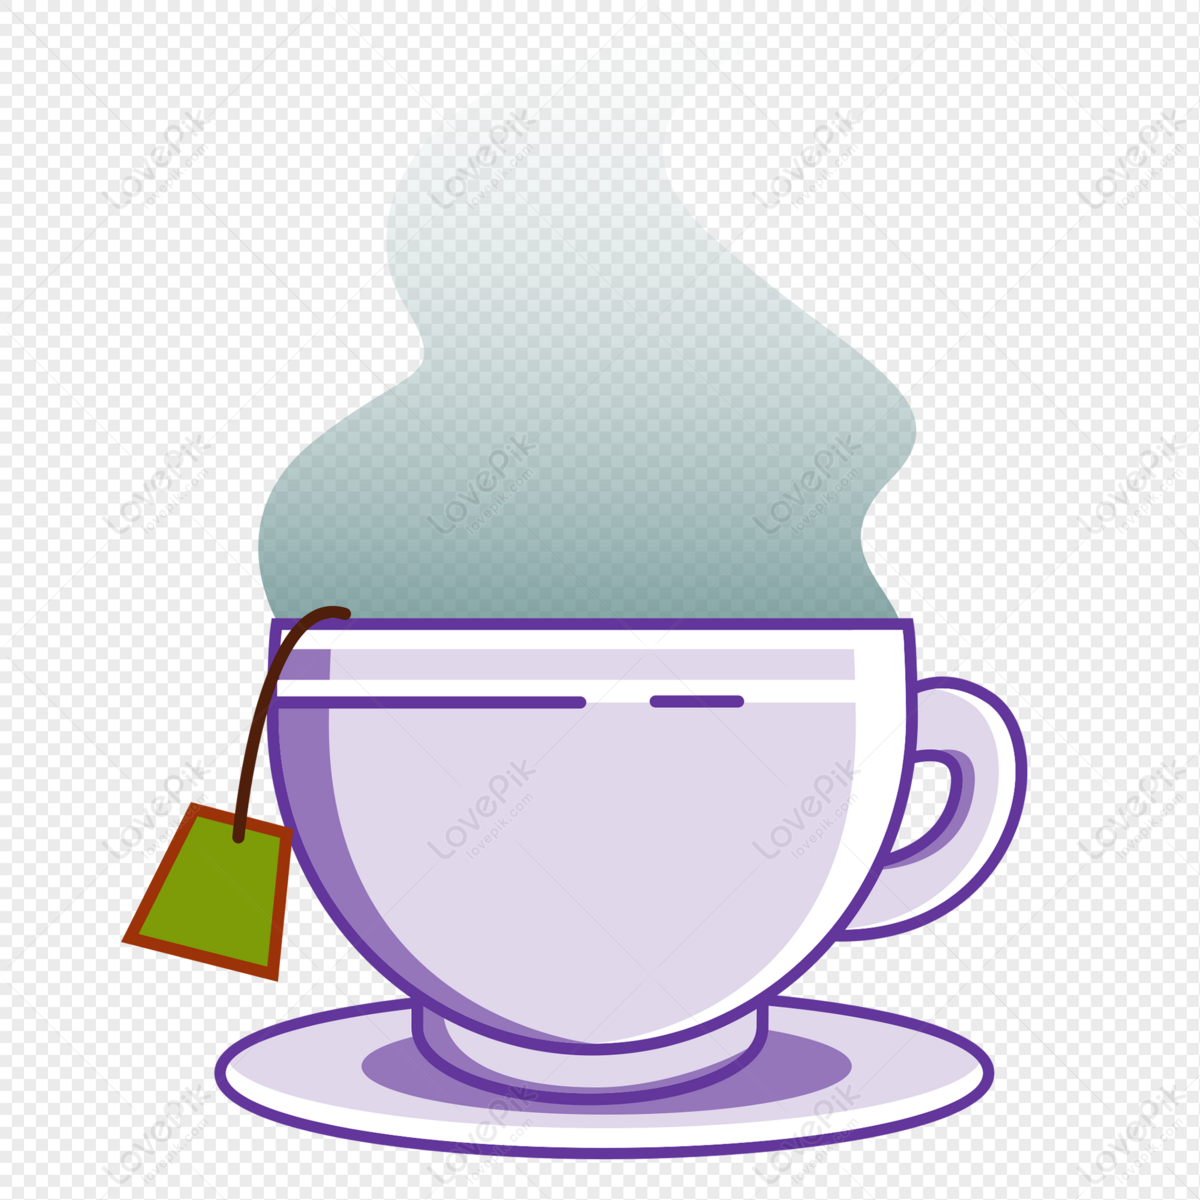 Cartoon Cup Of Hot Tea Illustration Free PNG And Clipart Image For Free  Download - Lovepik | 401274849